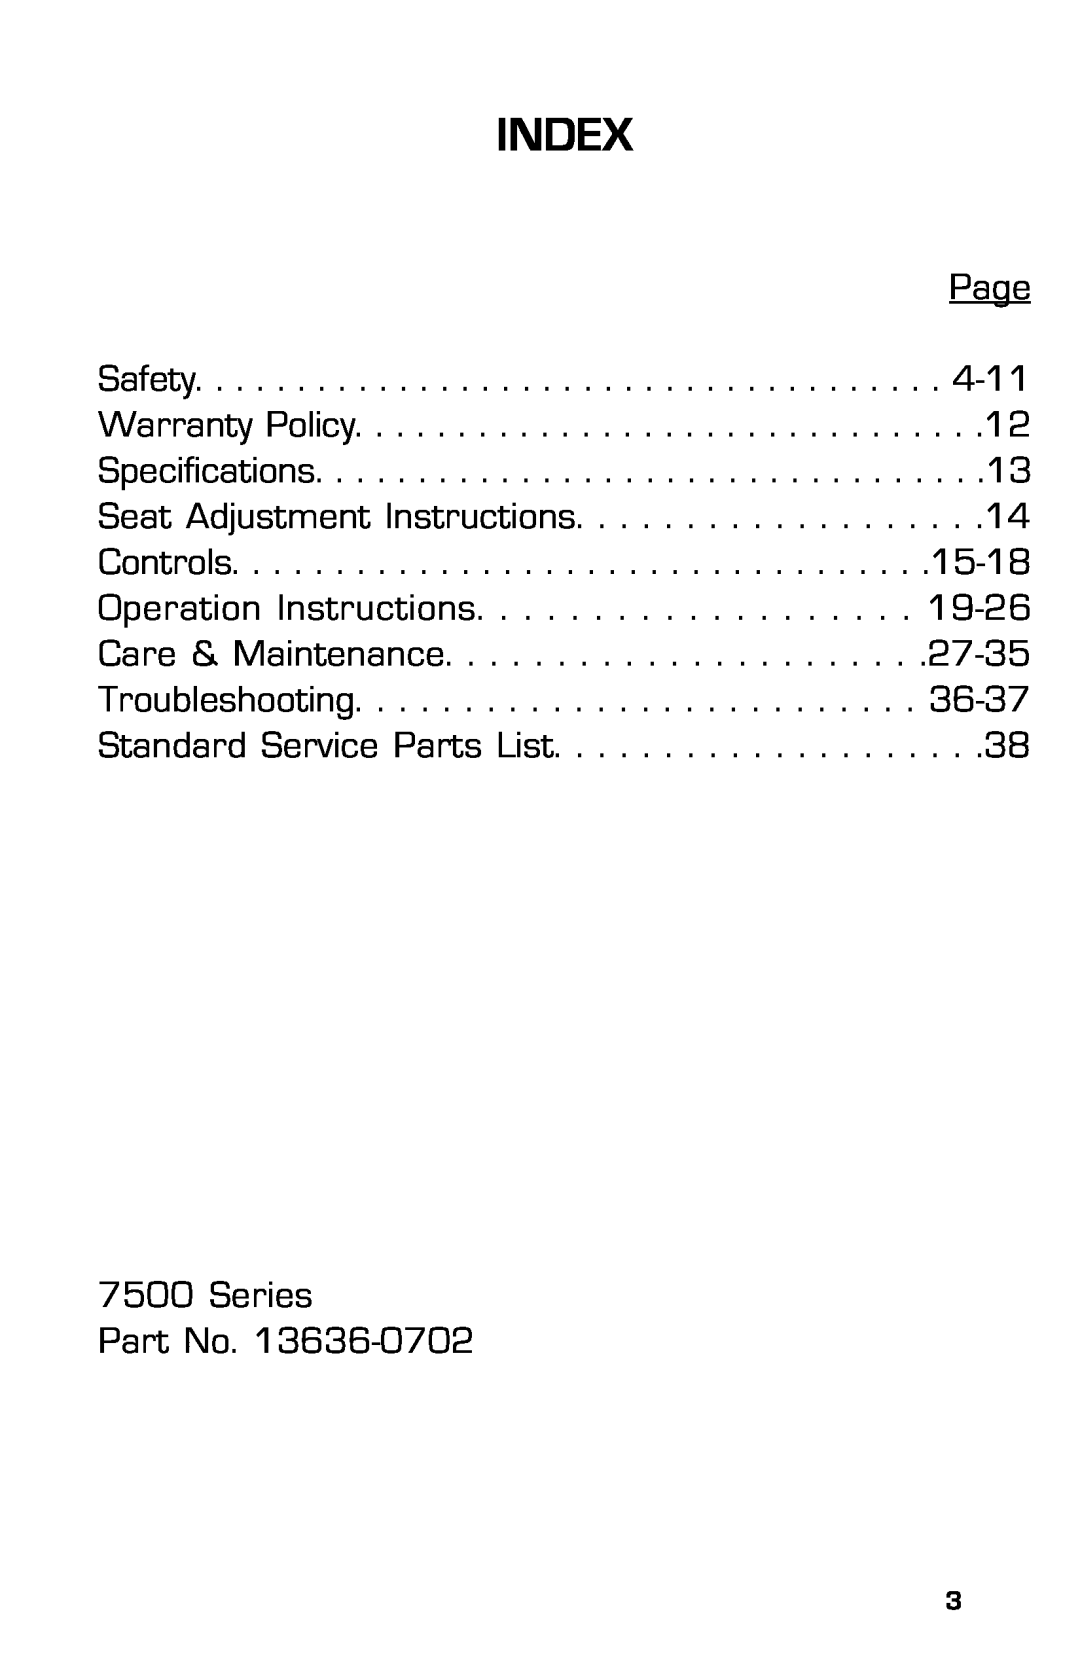 Dixon 13636-0702, ZTR 7525 manual Index, Page Safety Warranty Policy Specifications, Series 